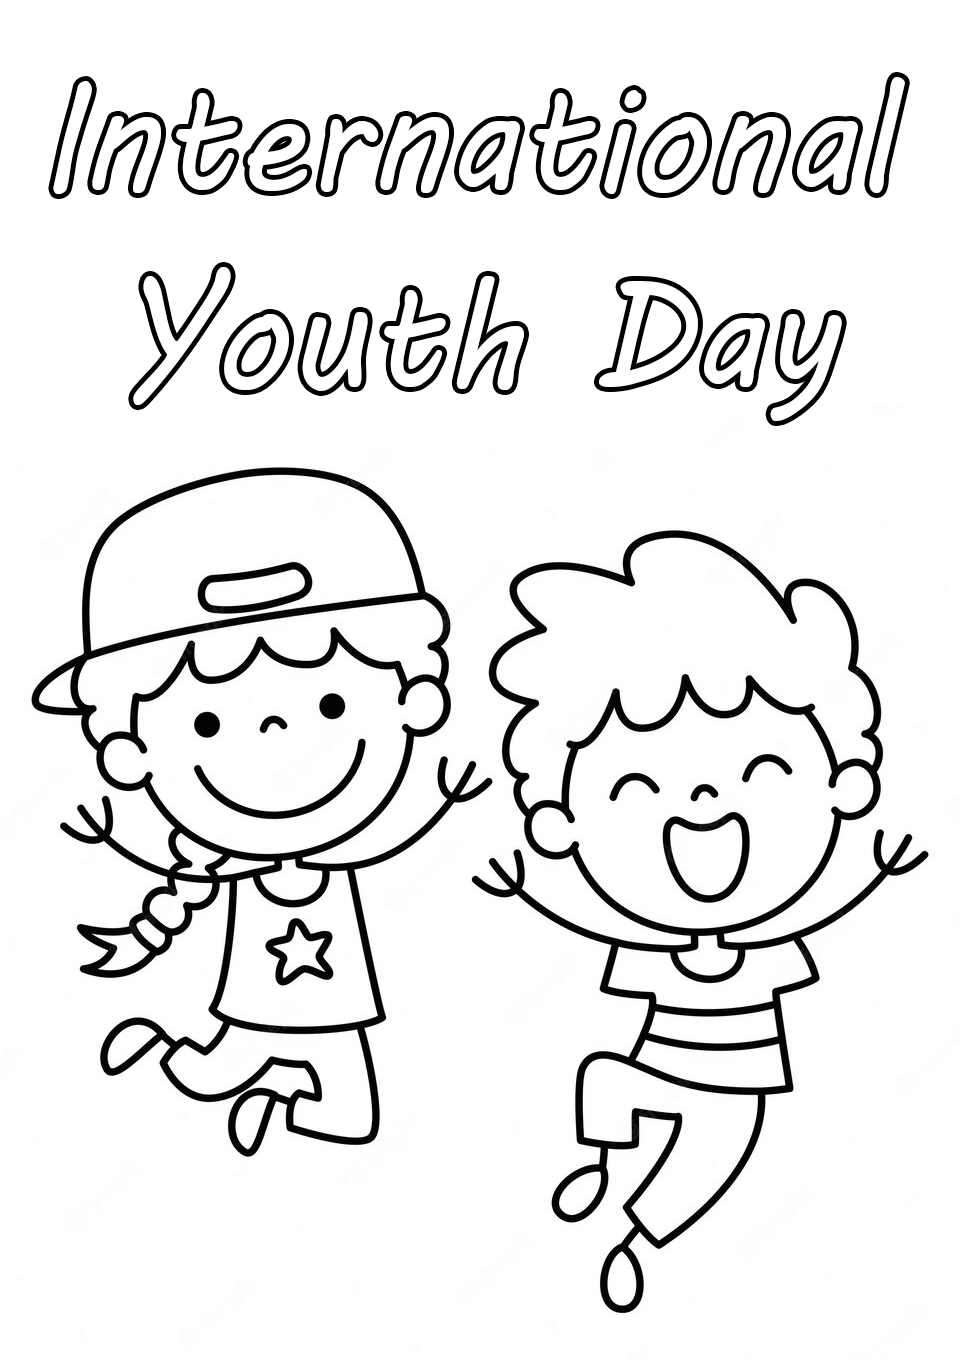 International Youth Day Coloring Sheets from International Youth Day